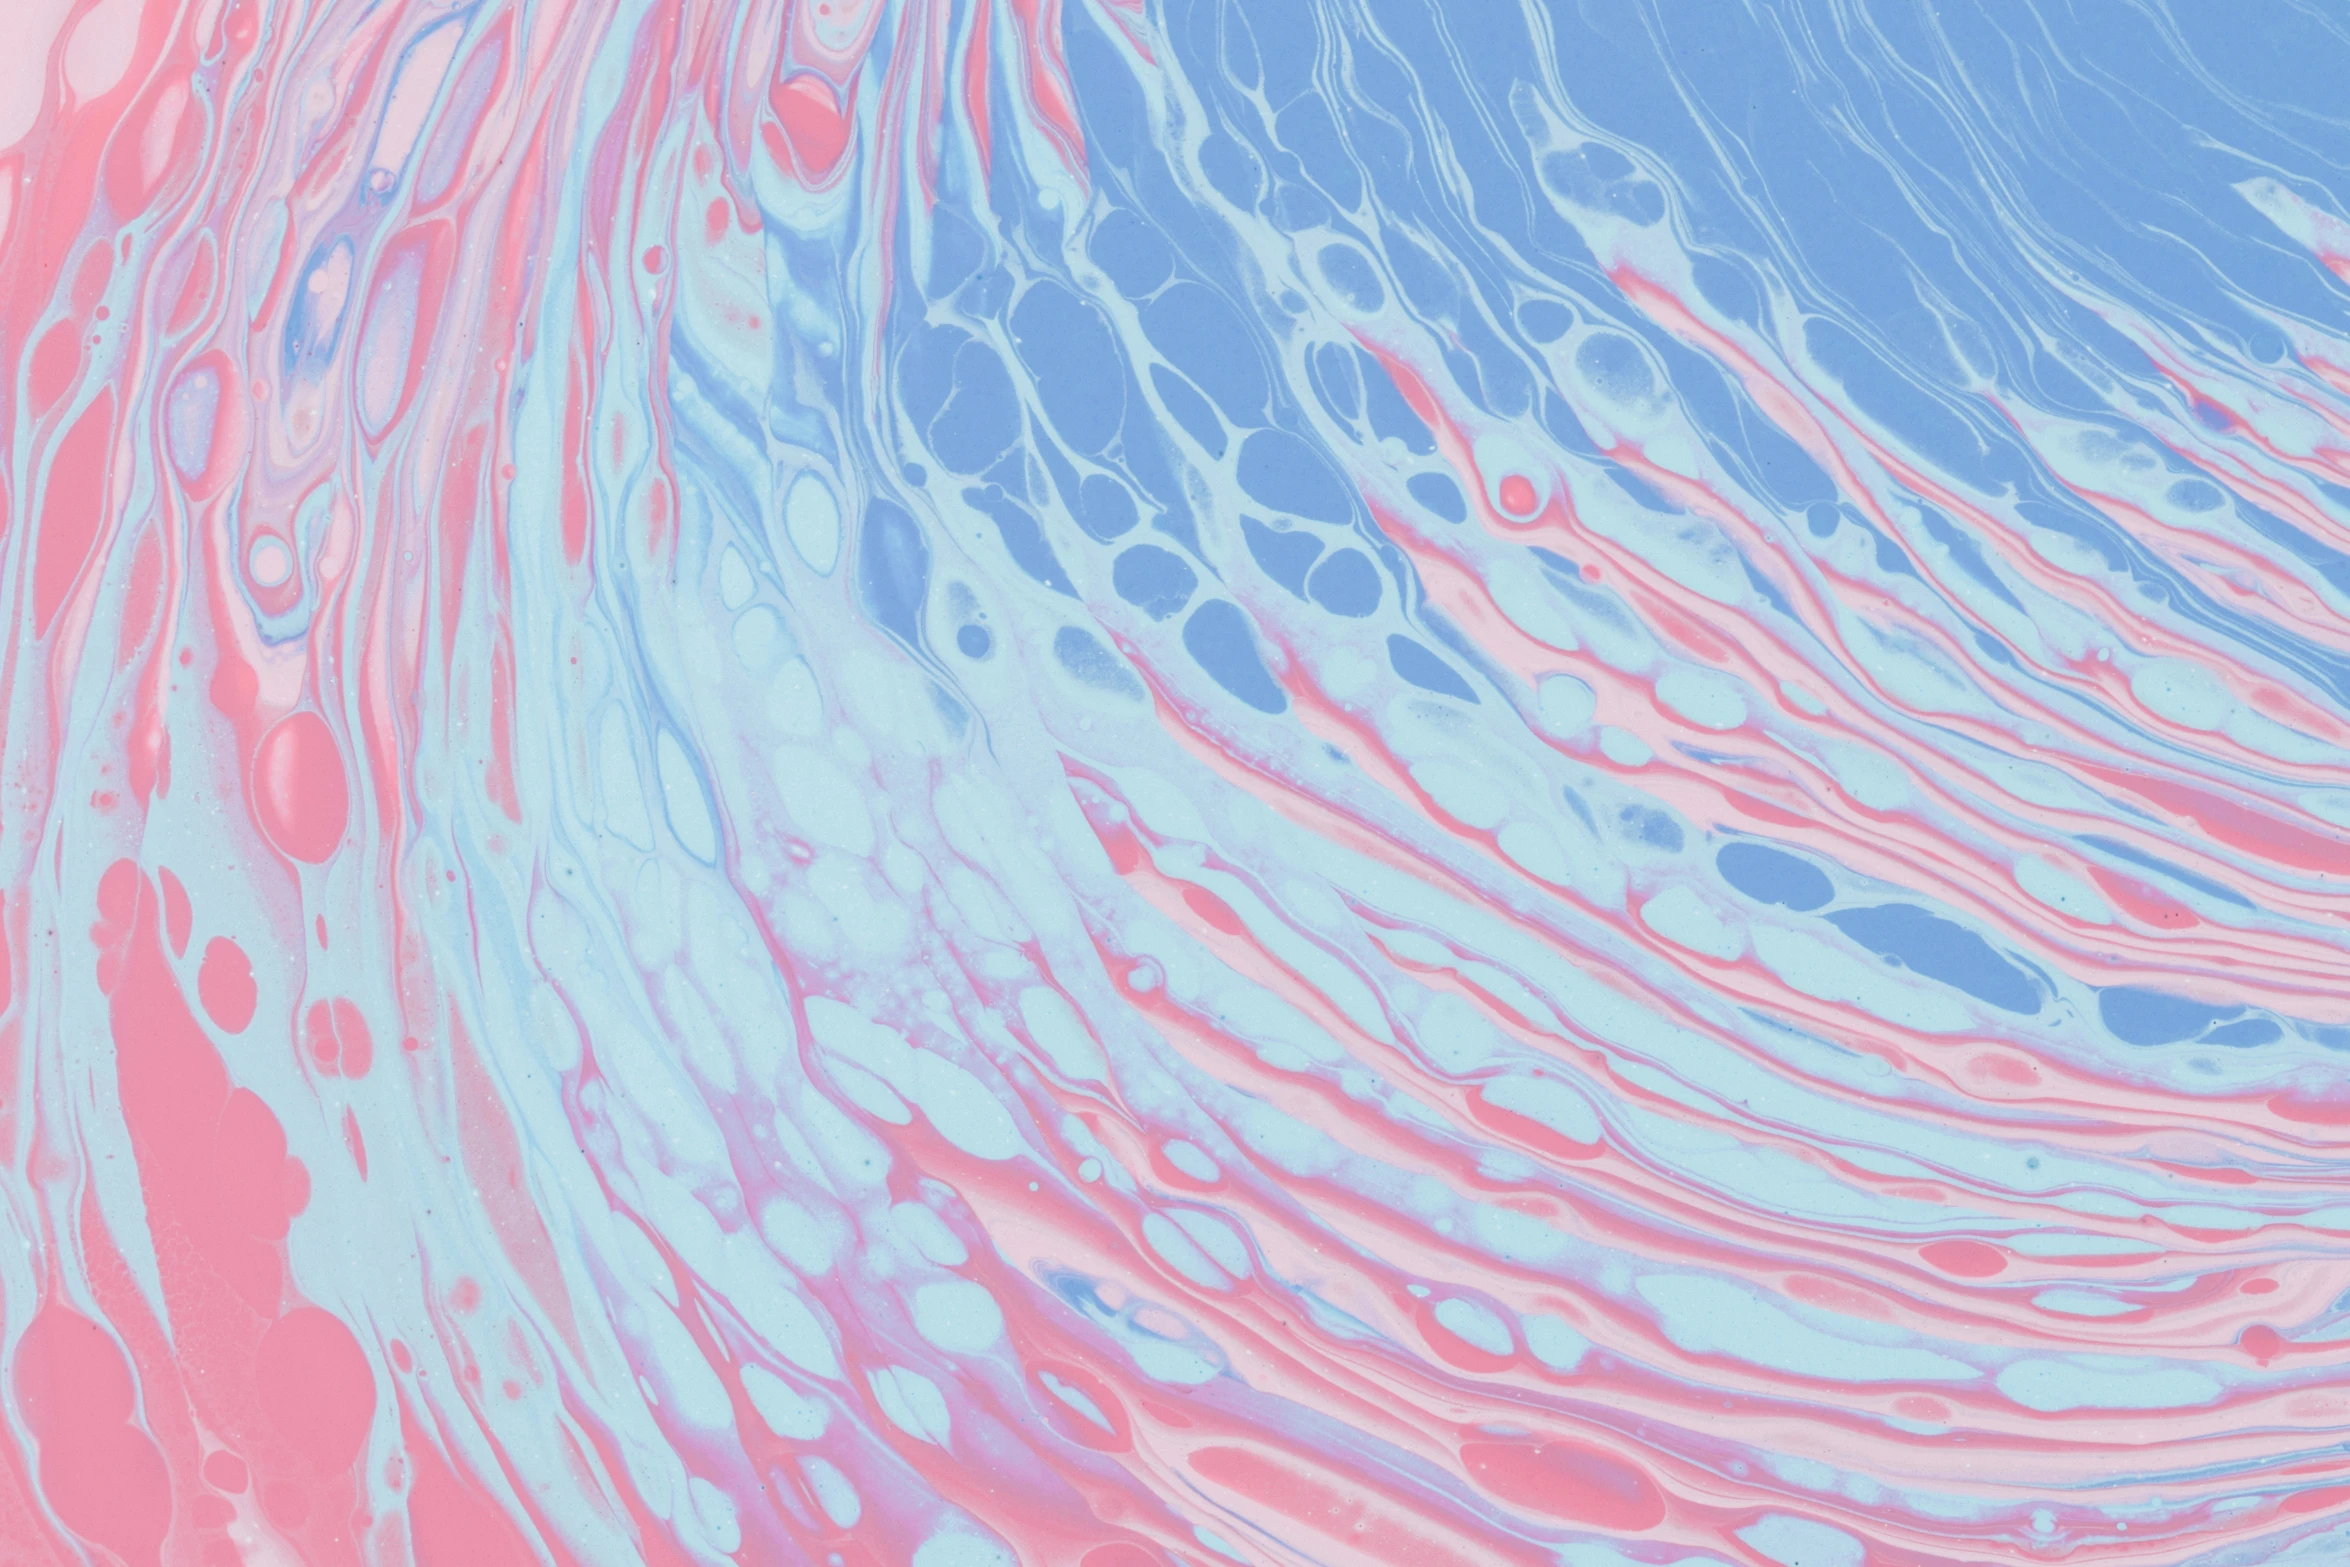 a painting that appears to be pink and blue